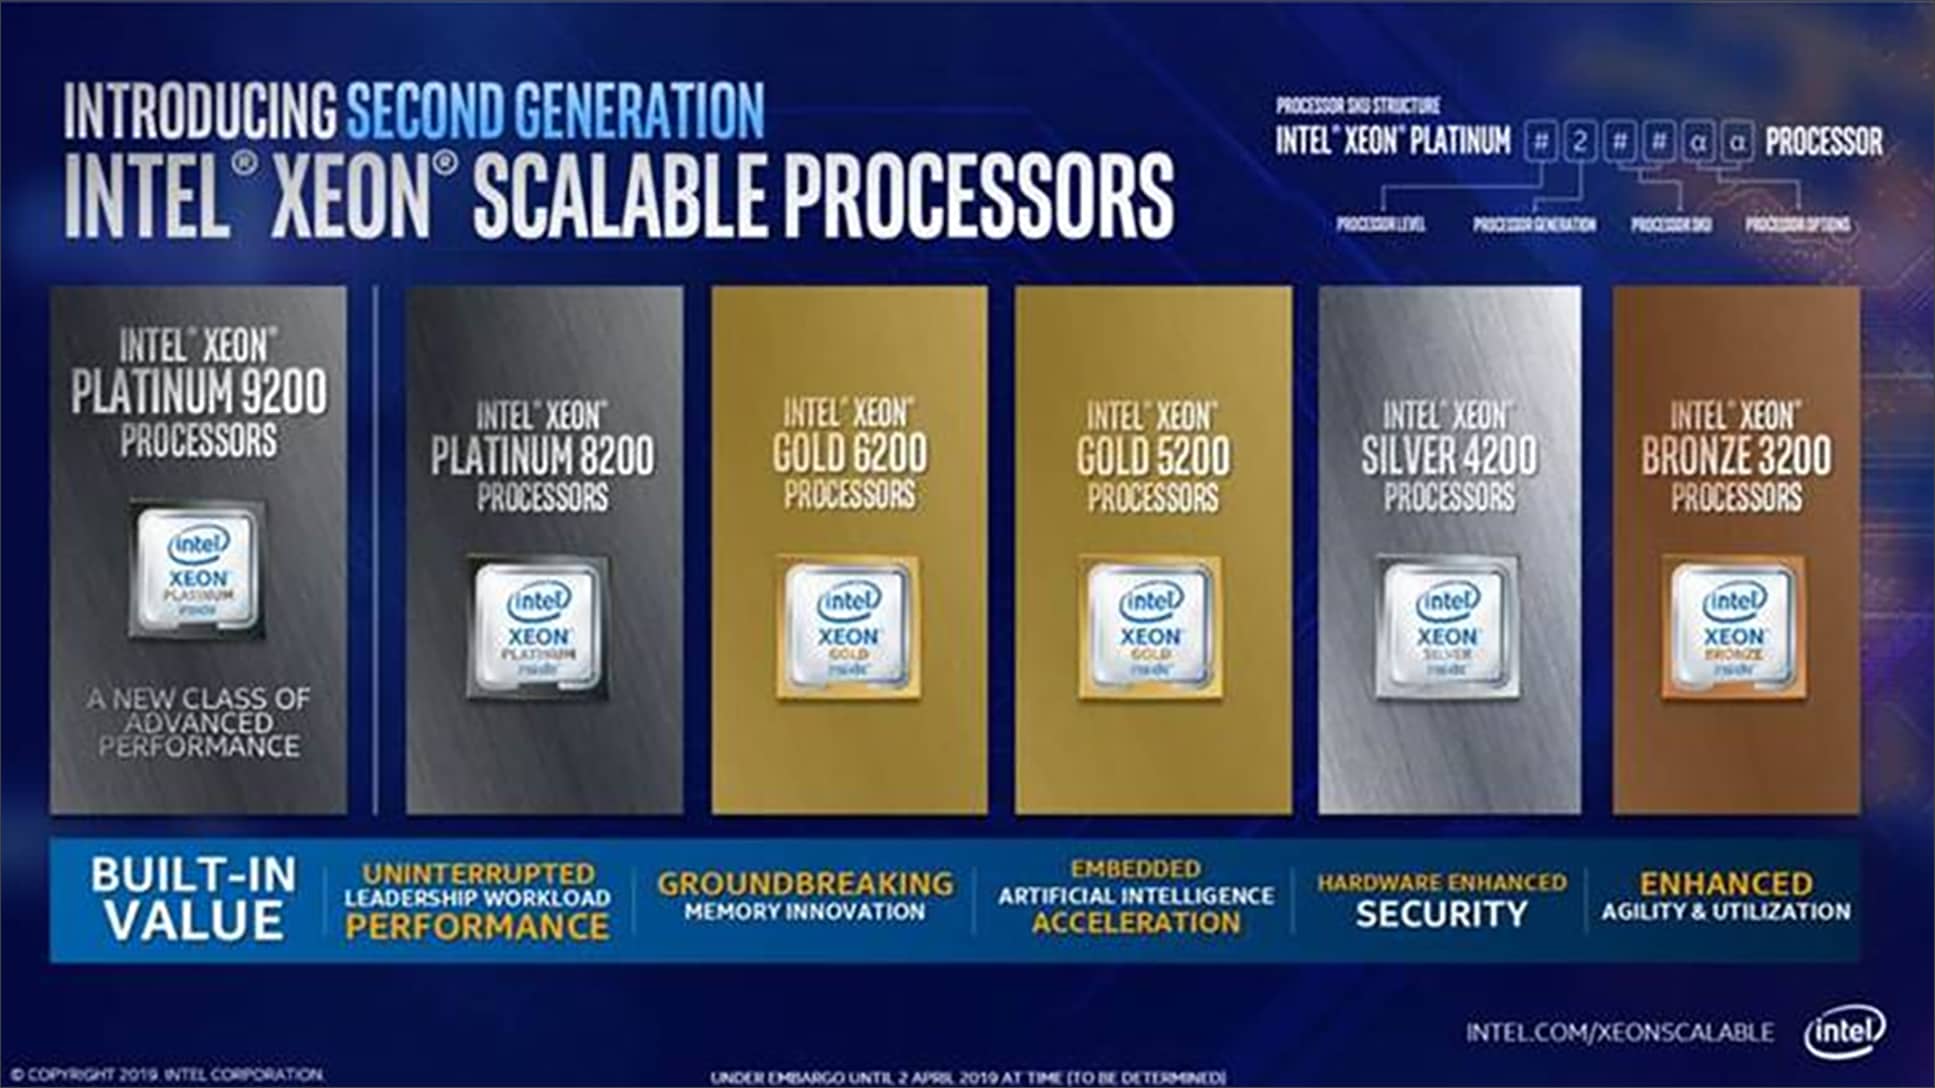 2nd generation Intel Xeon Scalable processors